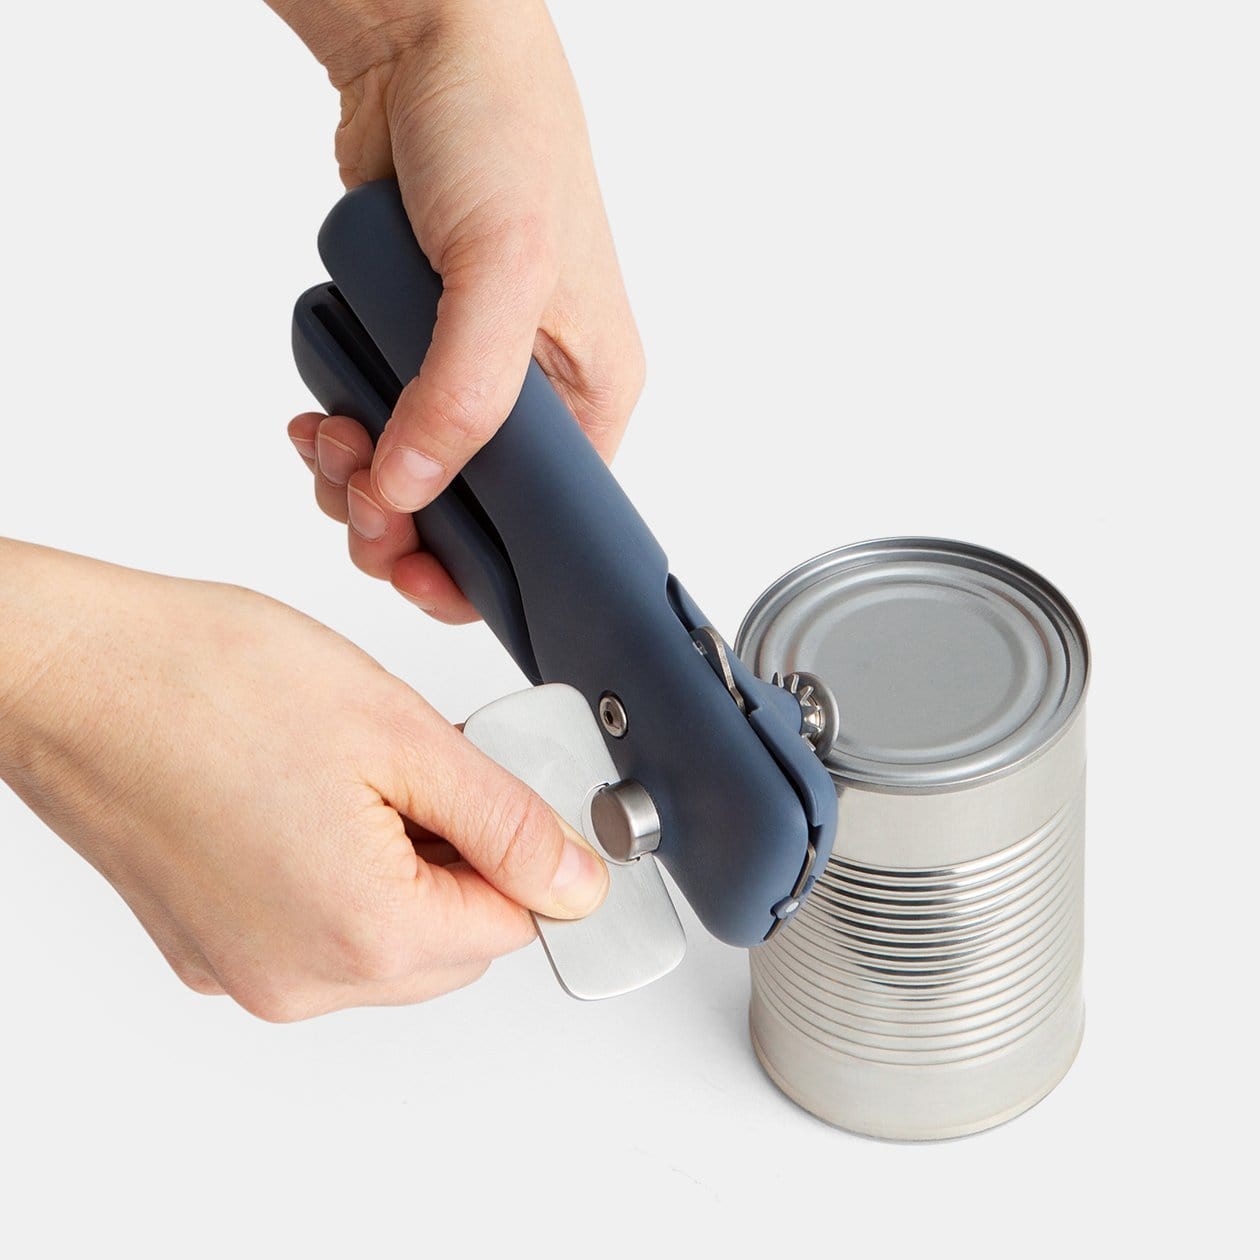 Manual Can Opener Stainless Steel Handheld Can Opener with Magnet